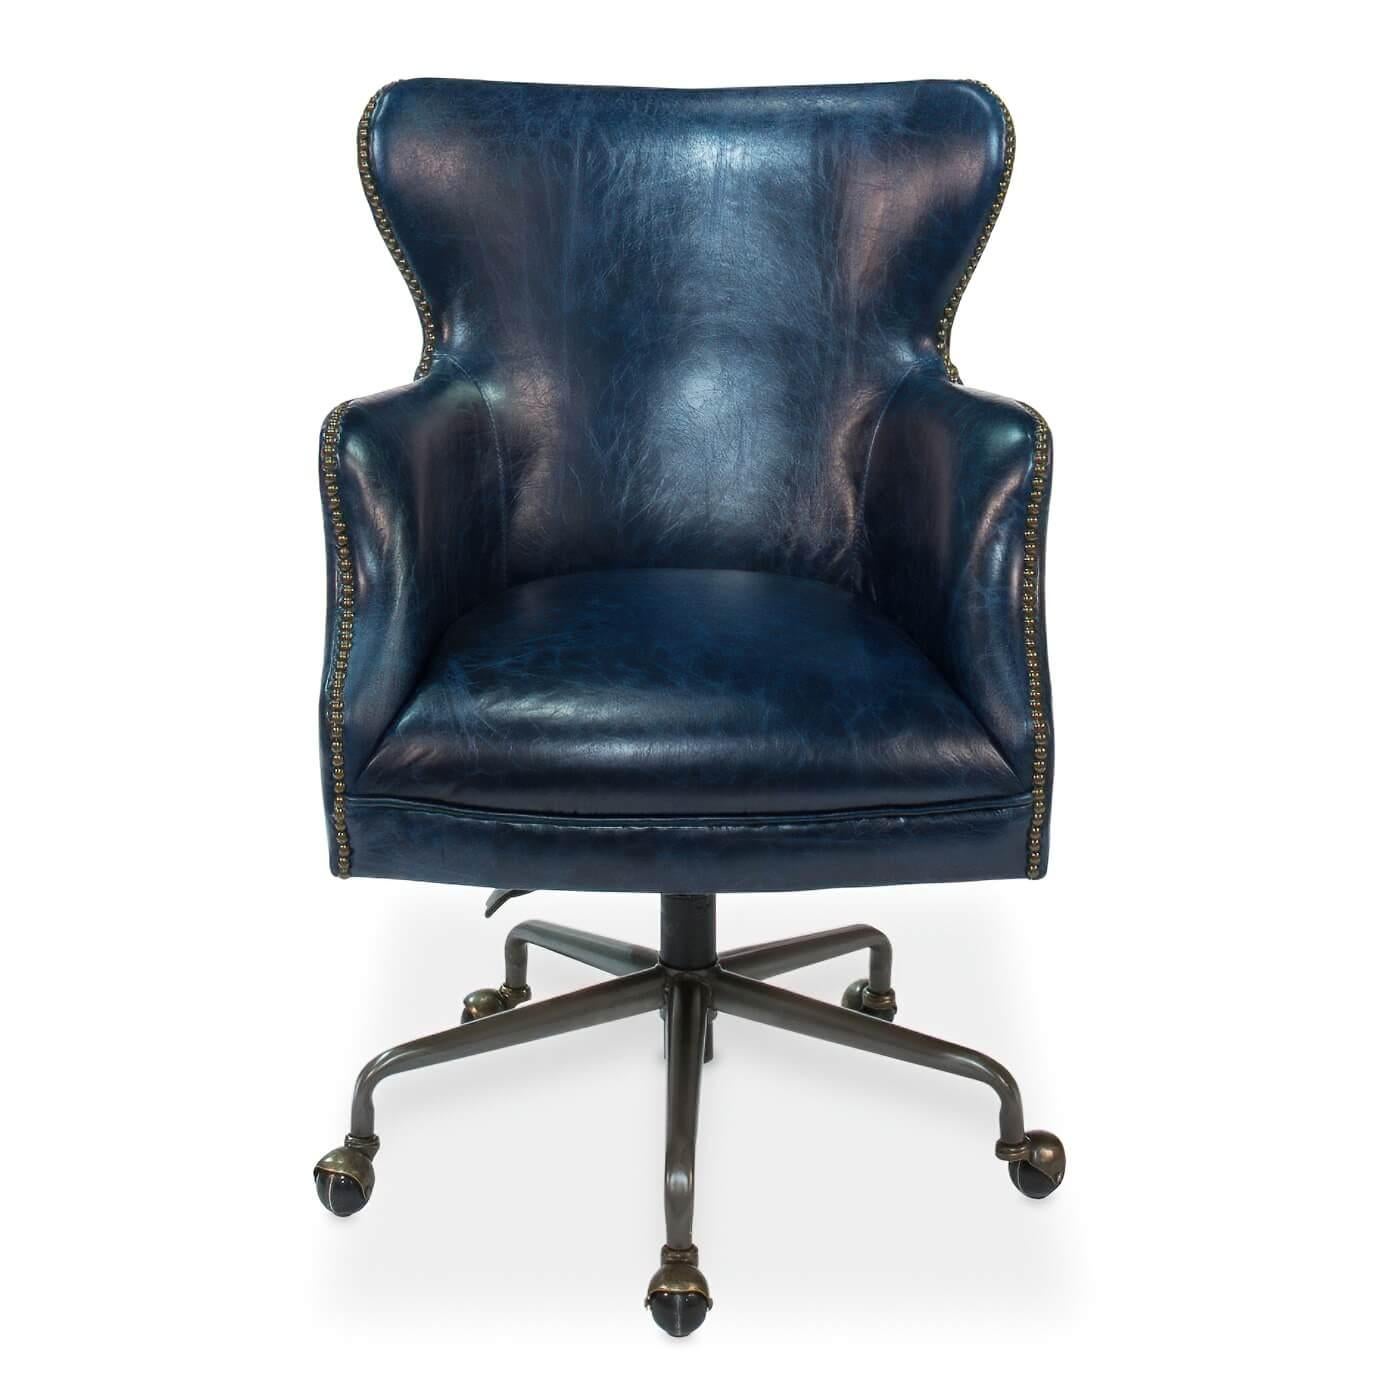 A classic leather office chair in Chateau blue. This stately chair has a smooth leather interior and exterior and is accented with nailhead trim accents. It rests on a 5 prong base. Crafted with Pure Aniline top-grade cow leather.

Dimensions
25